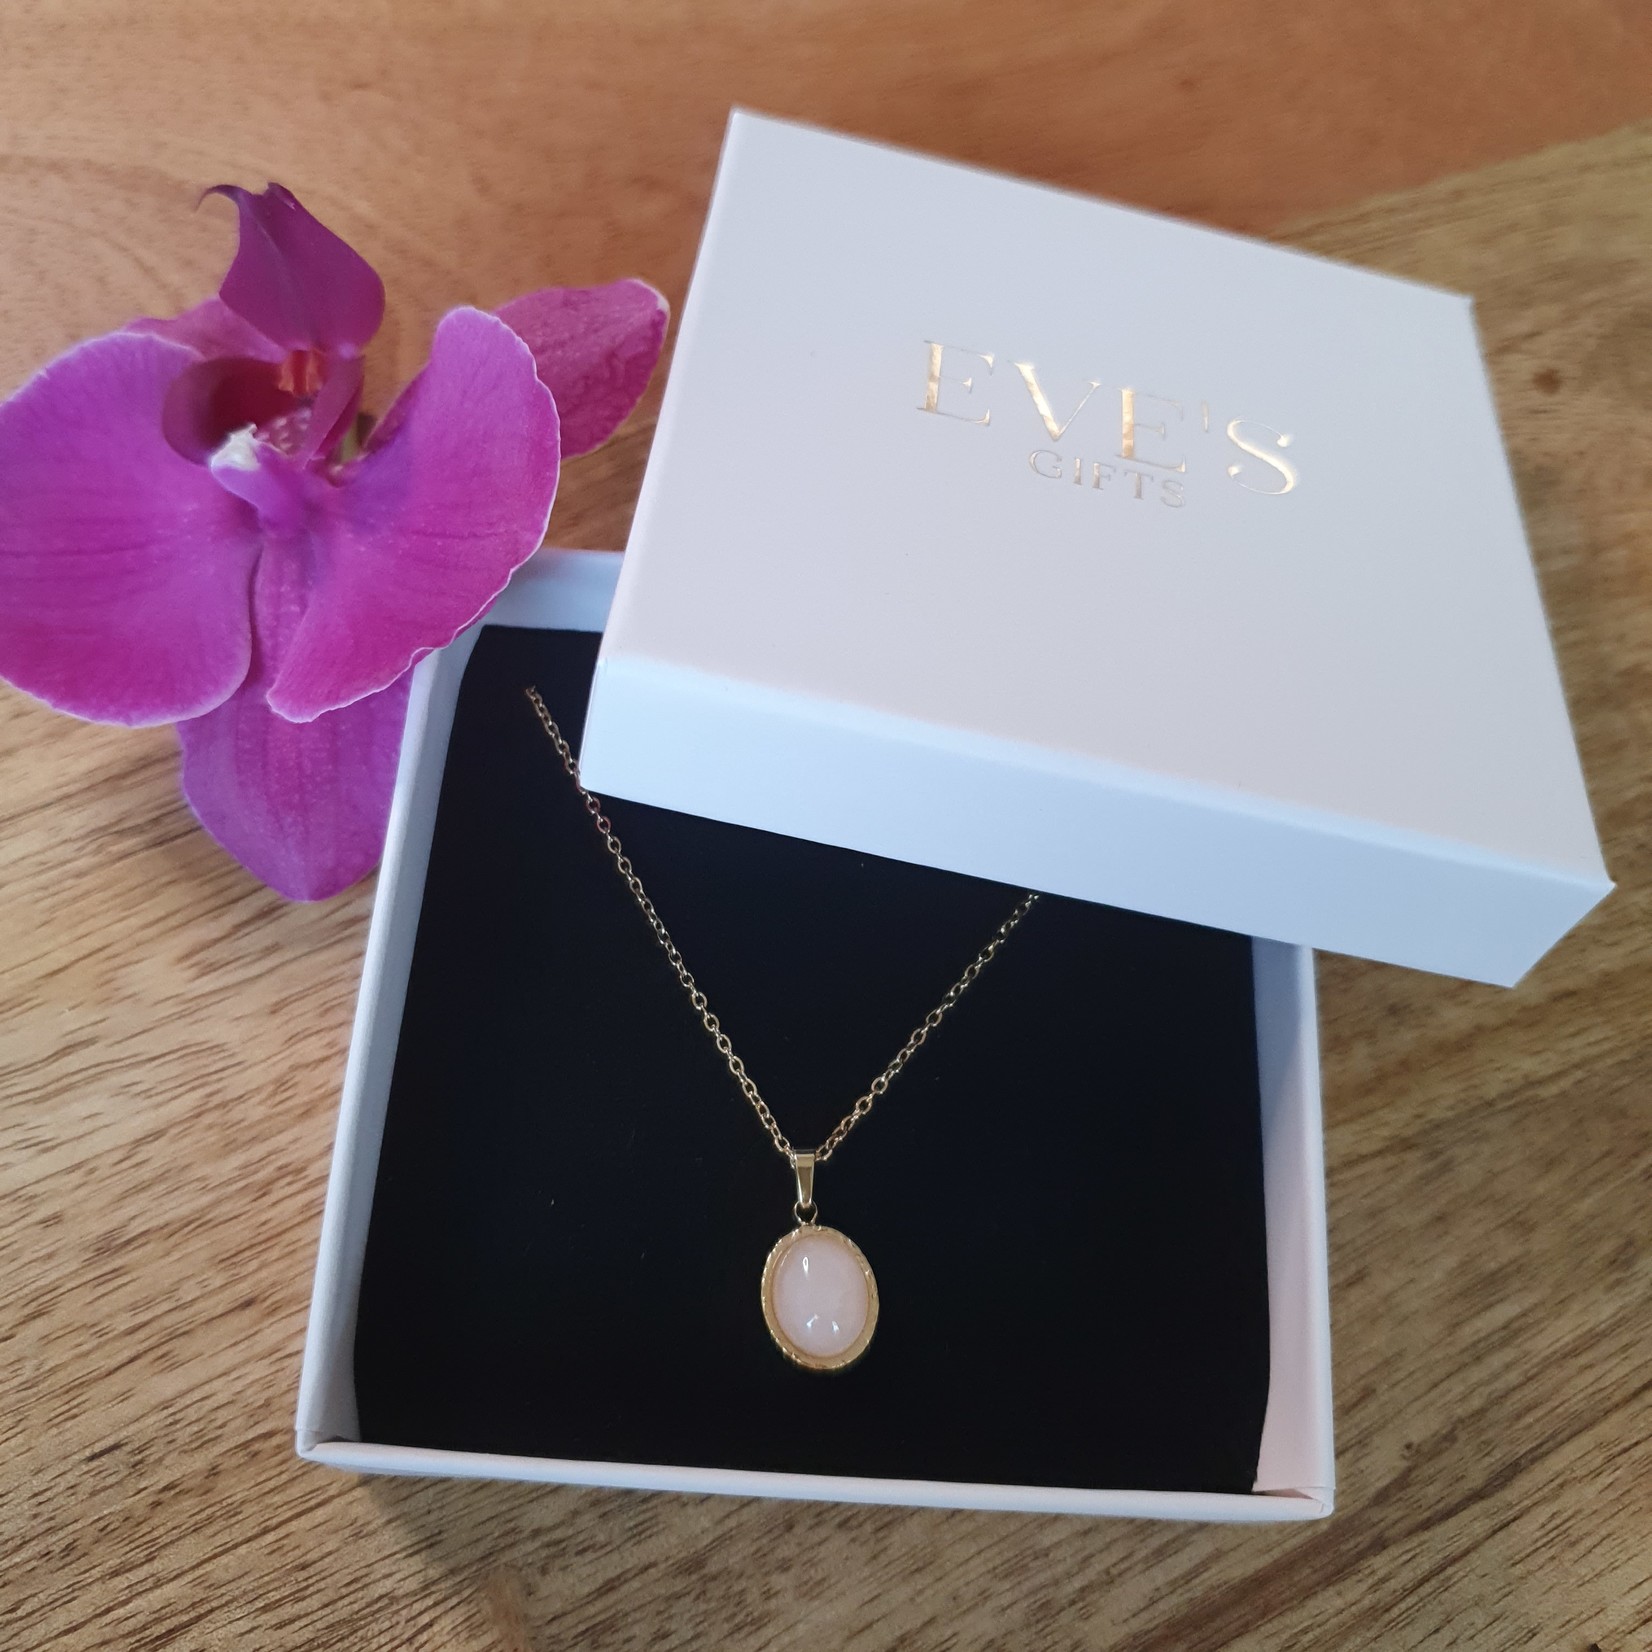 Eve's Gifts 14k gold plated stainless steel necklace with light pink stone